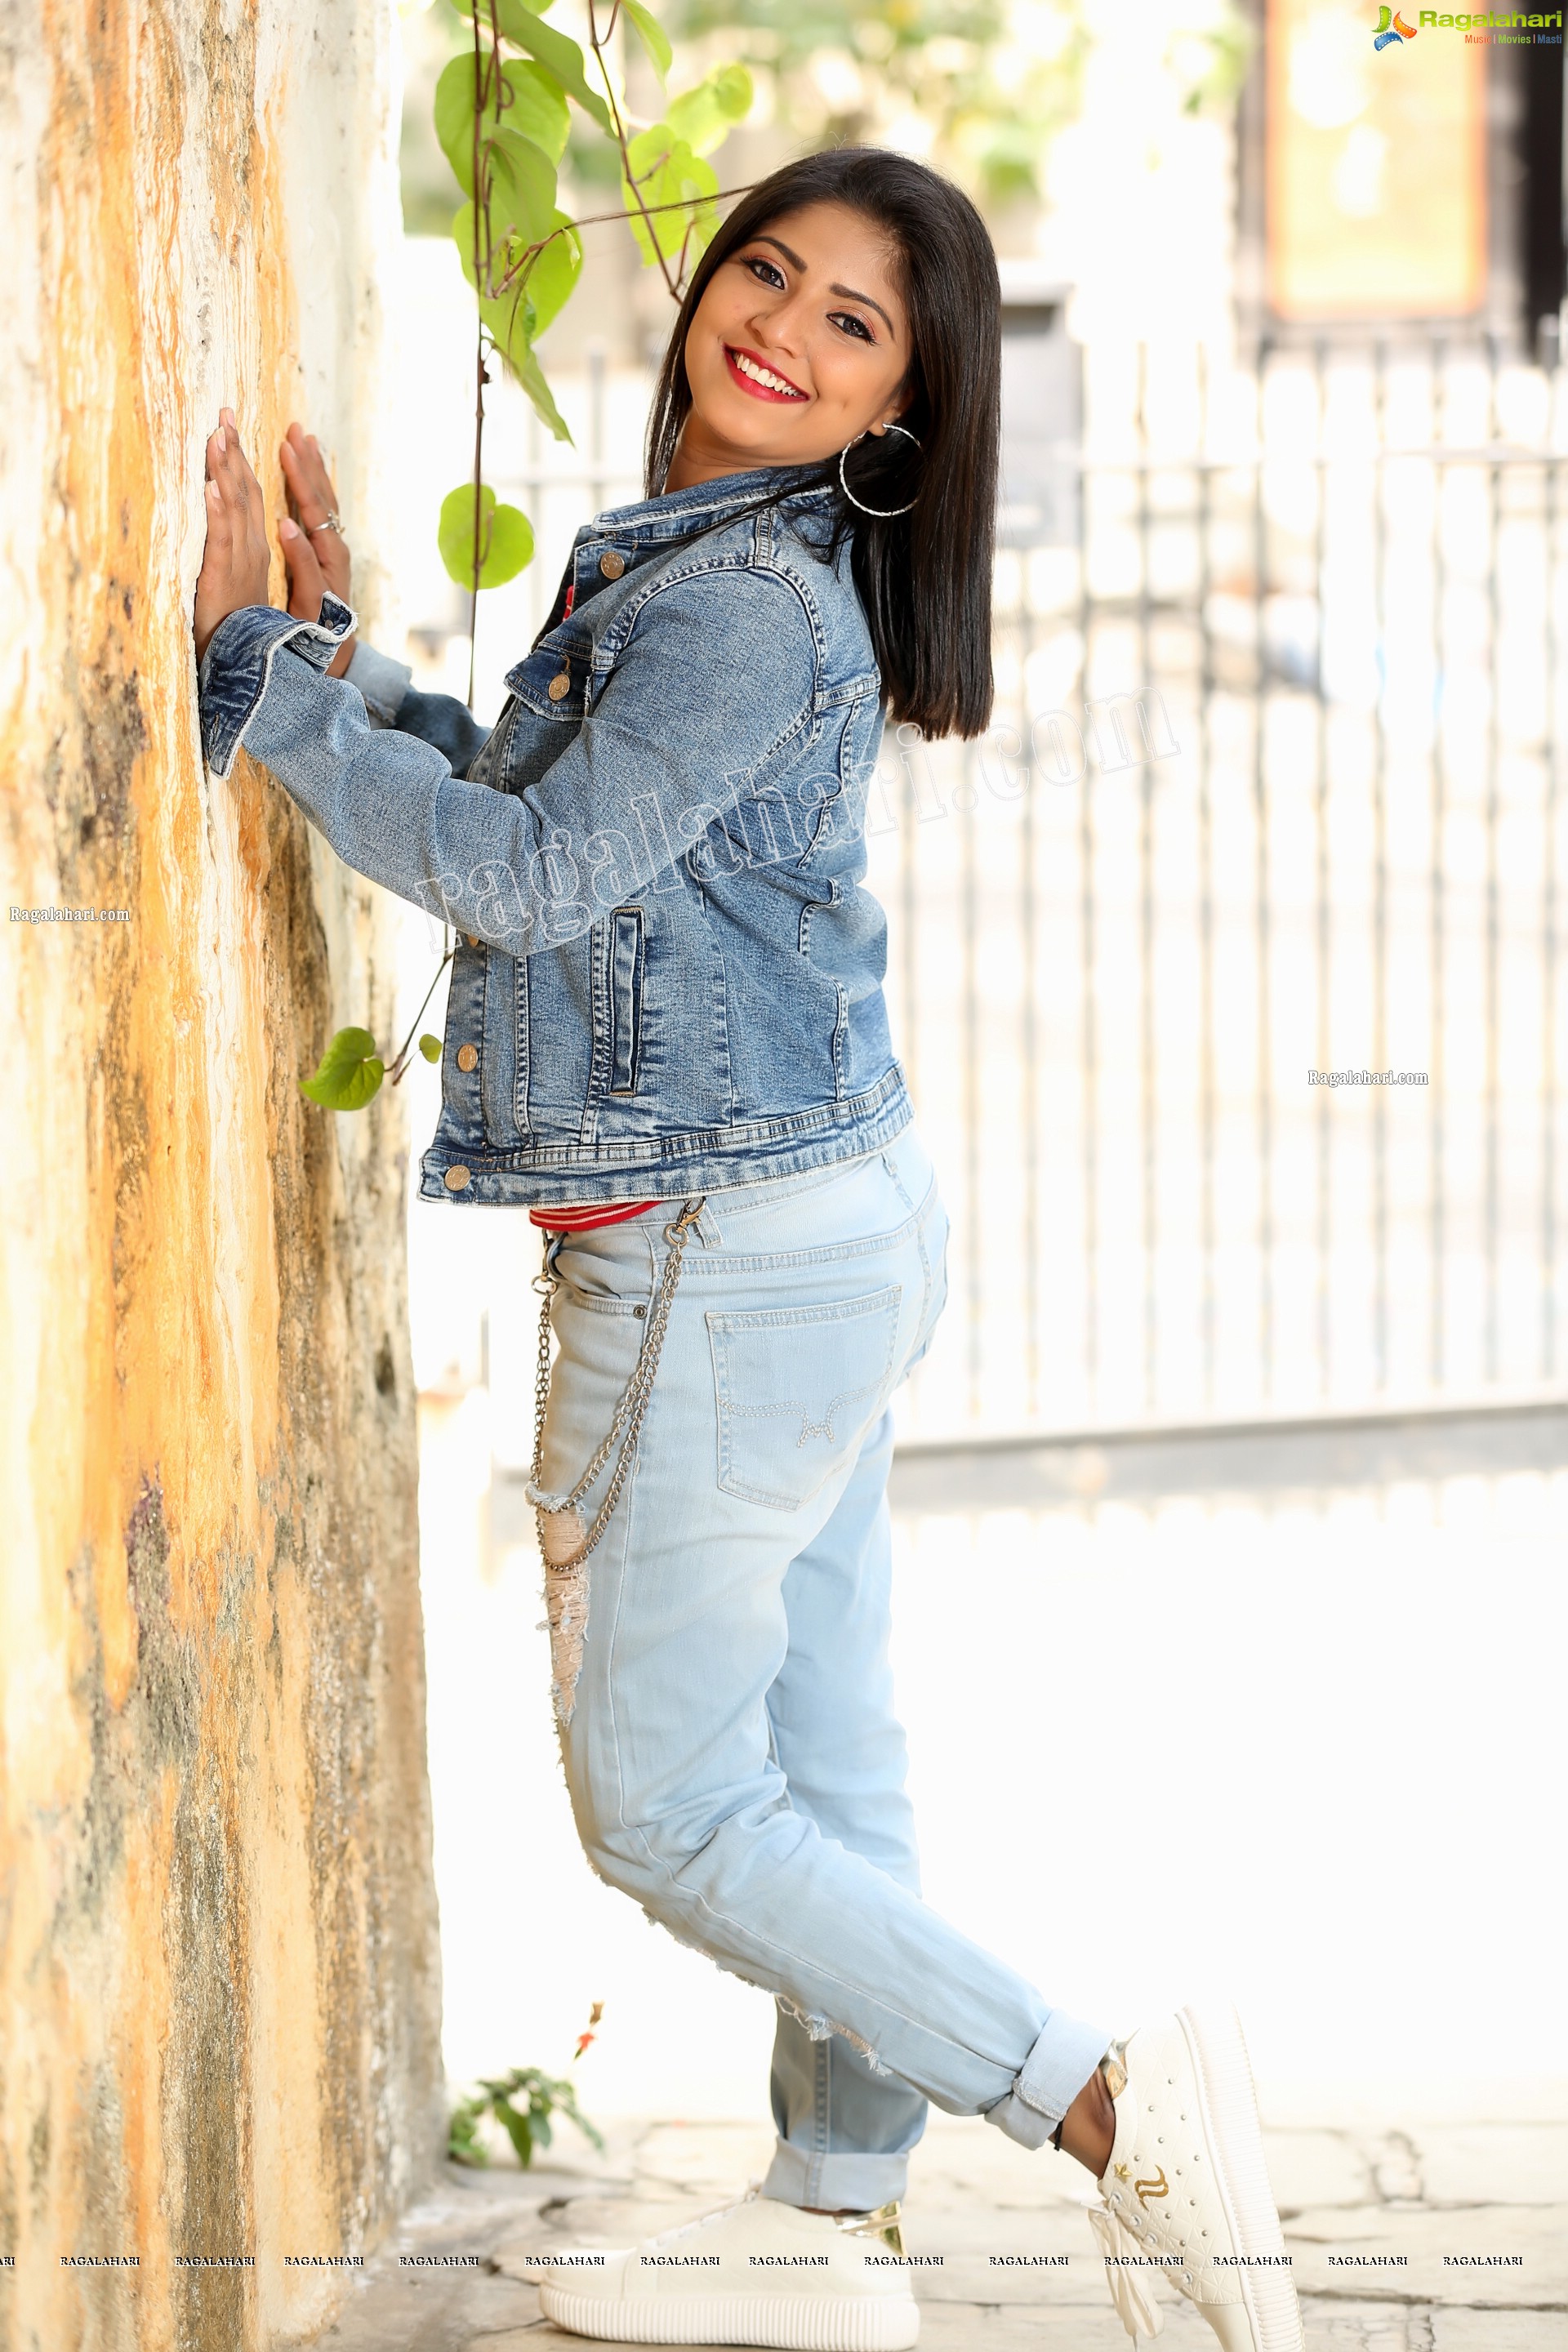 Shabeena Shaik in Trendy Denim Jacket Over Pink Striped Top with Jeans, Exclusive Photo Shoot